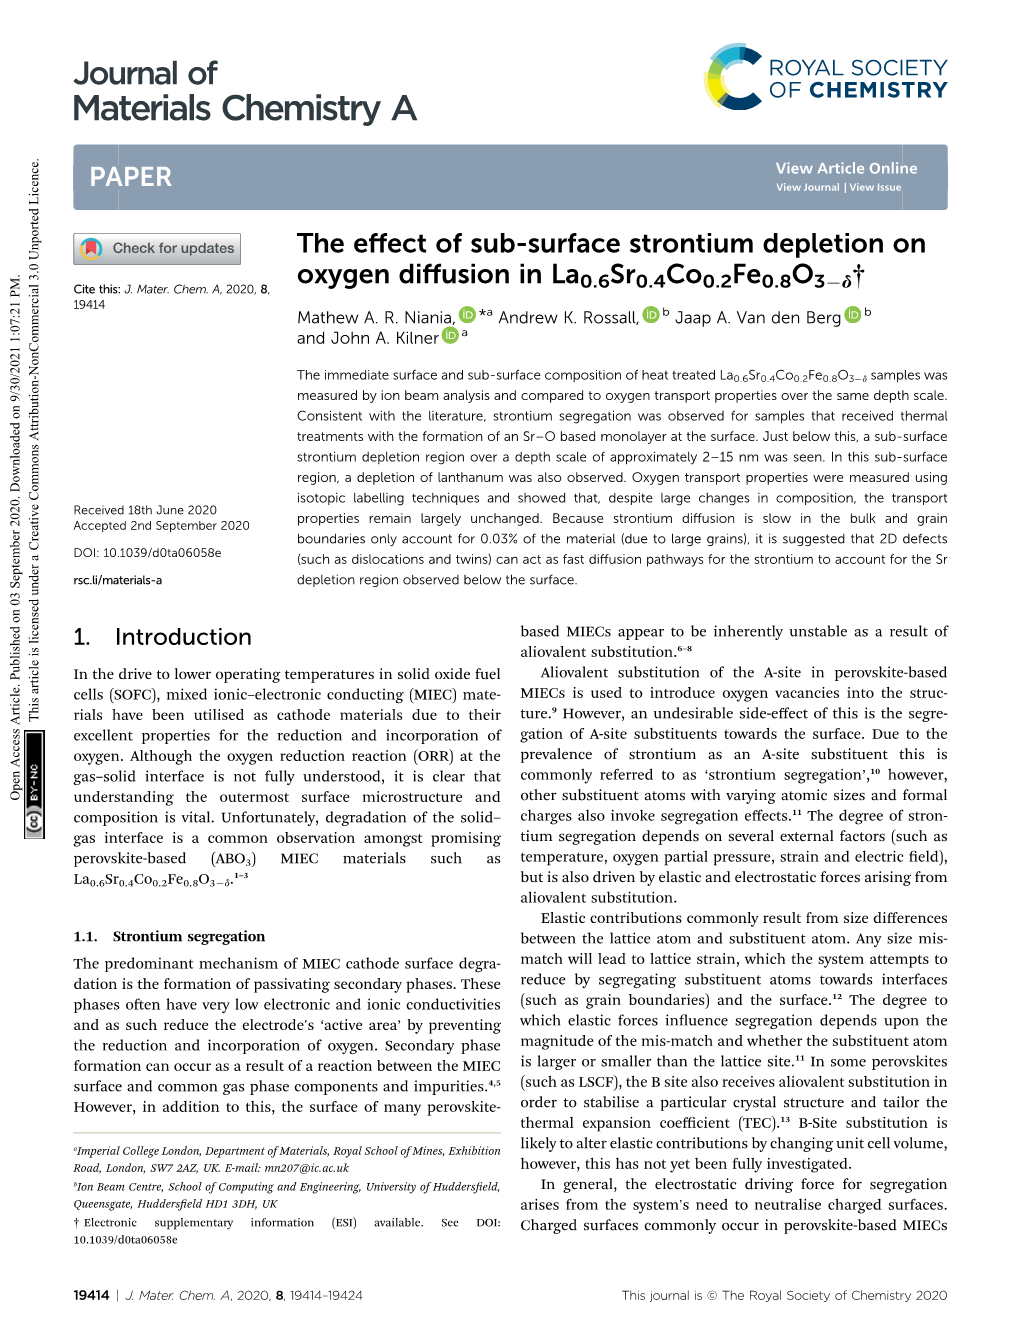 The Effect of Sub-Surface Strontium Depletion on Oxygen Diffusion In